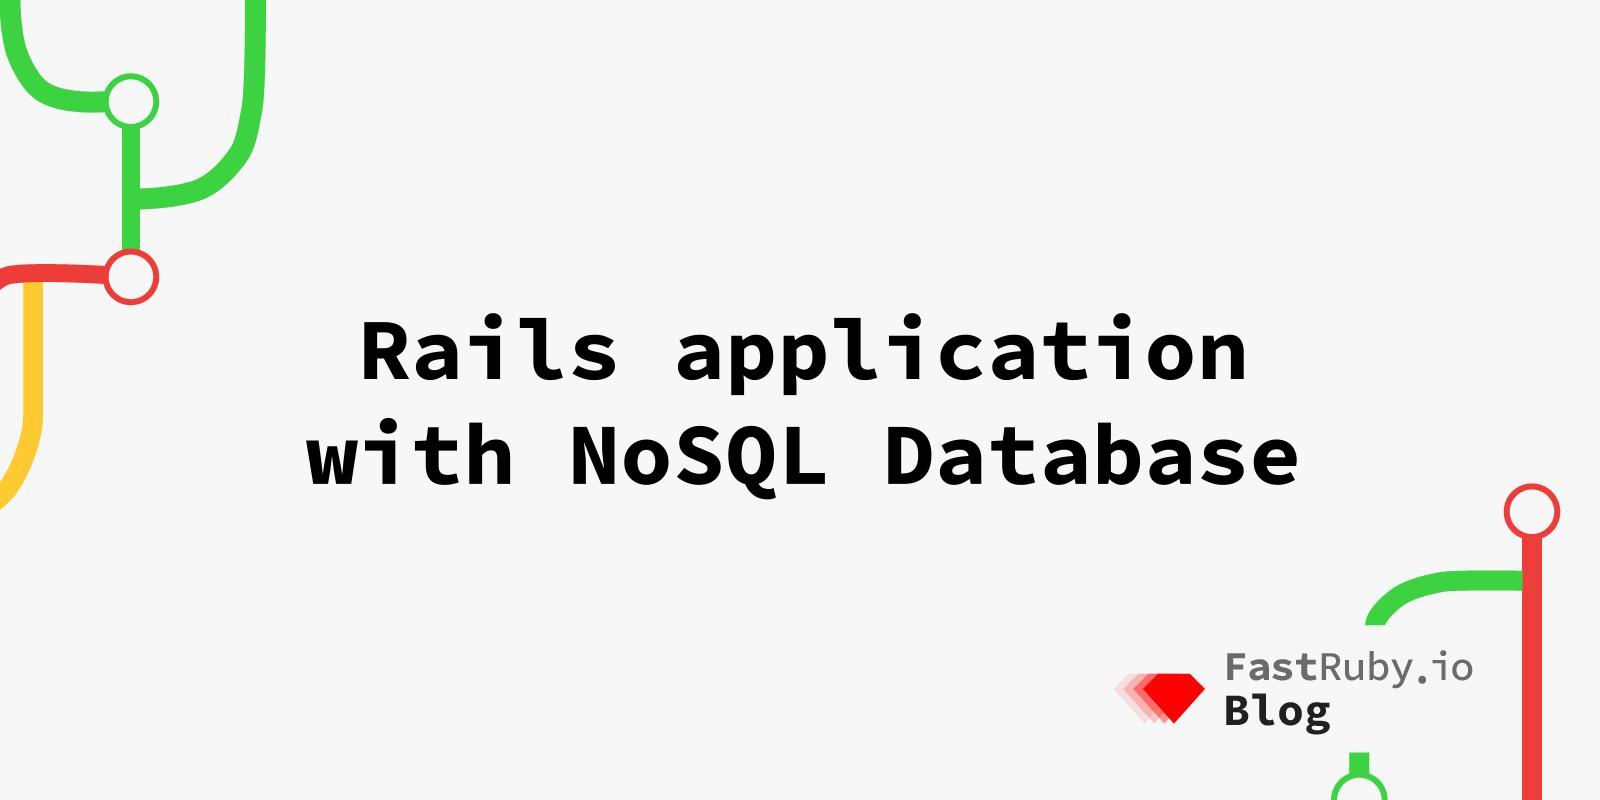 Rails application with NoSQL Database